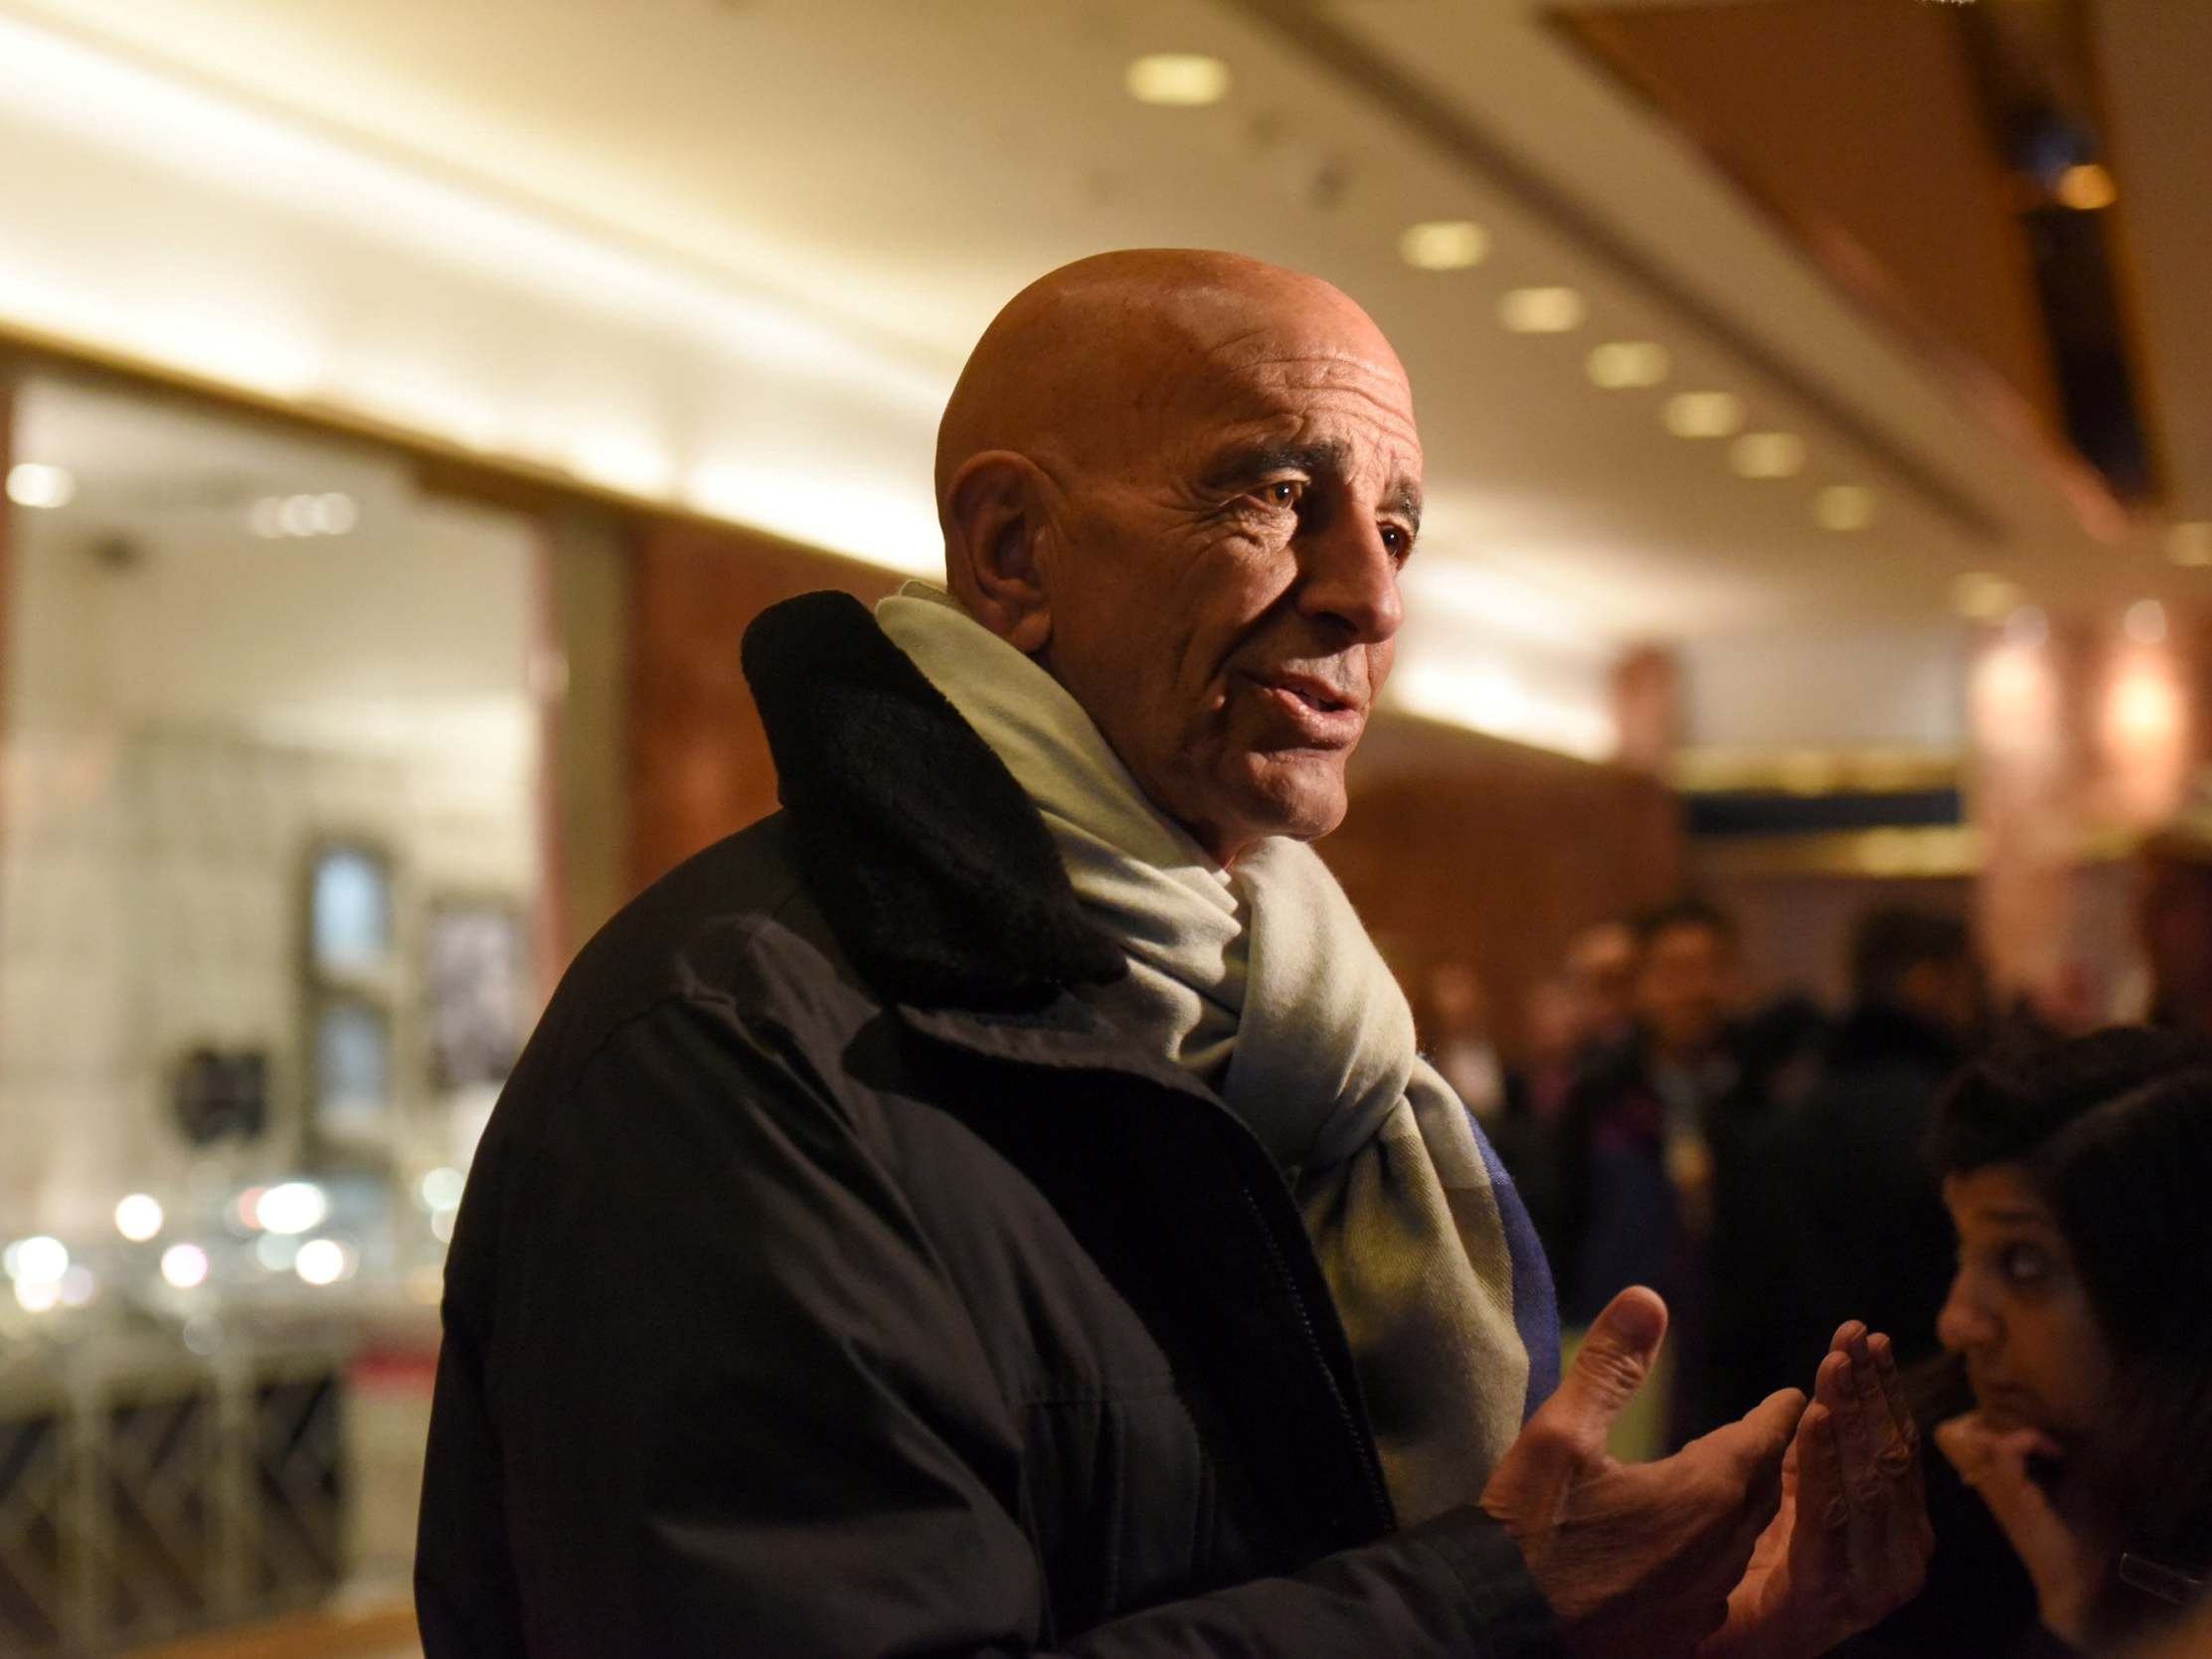 Tom Barrack speaks with members of the press at Trump Tower in 2017